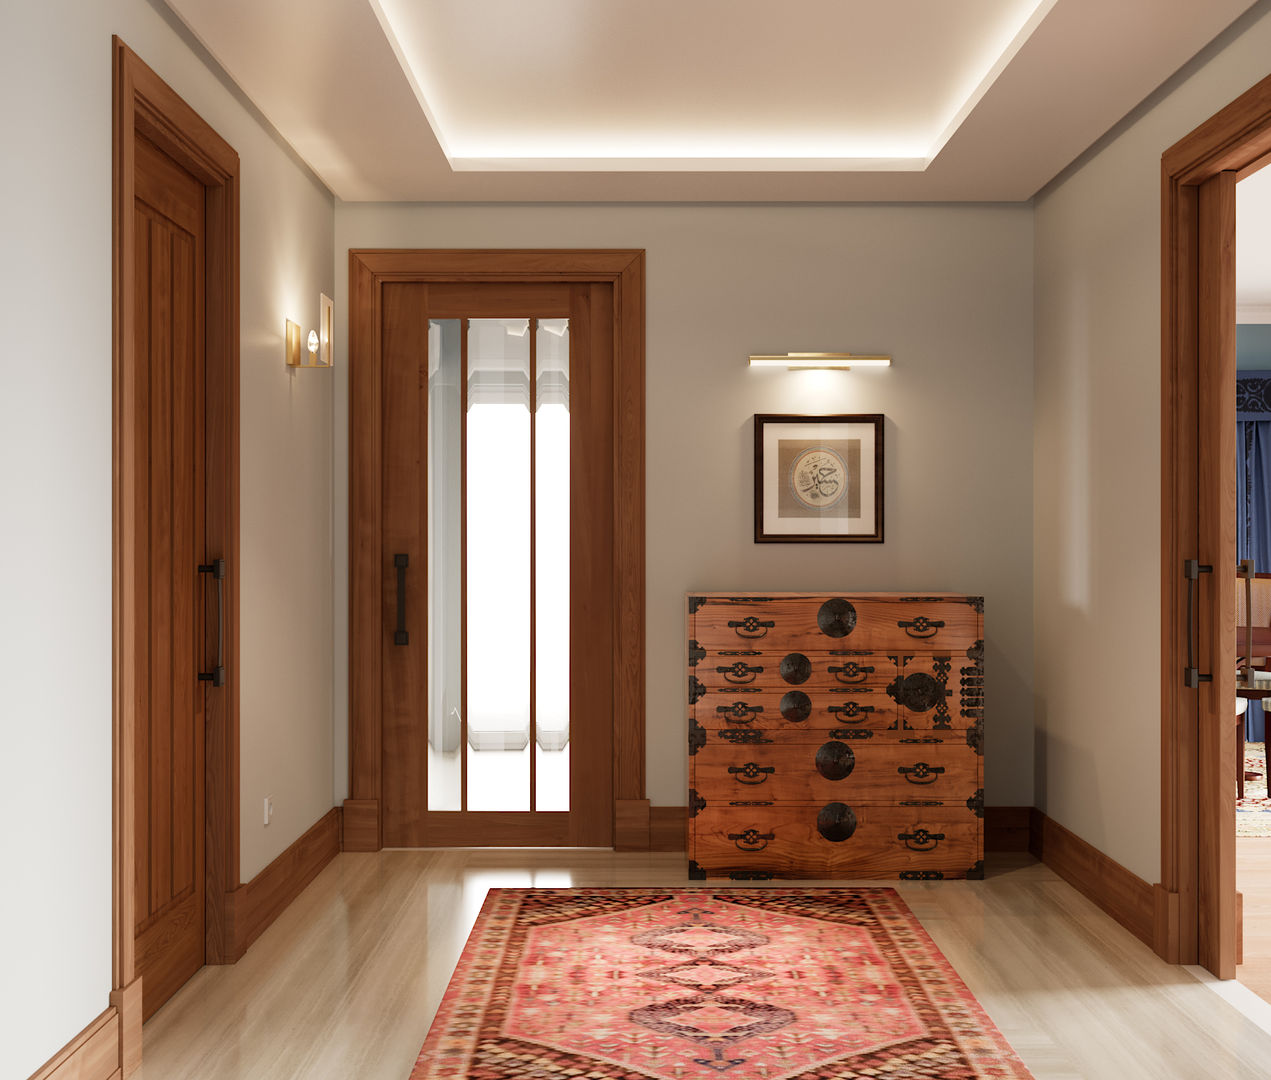 Pent House Apartment with middle eastern and oriental twist, Estoril, Inêz Fino Interiors, LDA Inêz Fino Interiors, LDA Eclectic style corridor, hallway & stairs